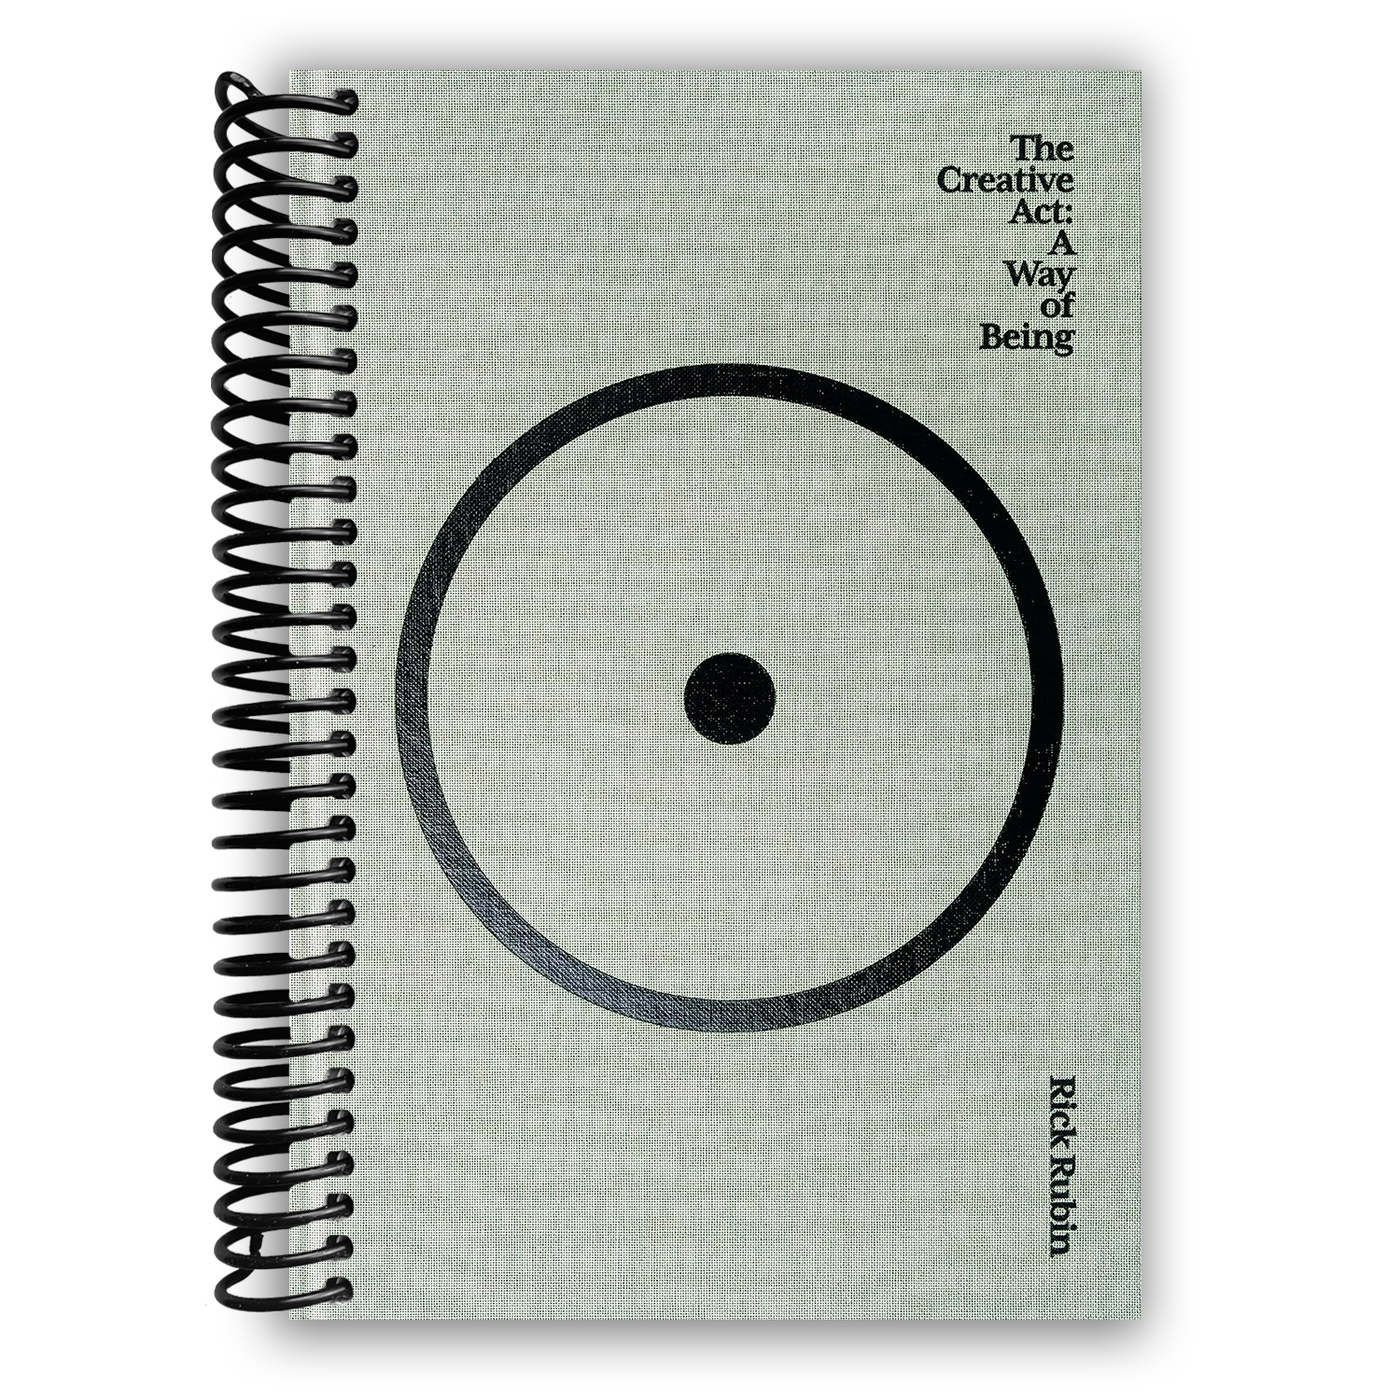 The Creative Act: A Way of Being (Spiral Bound)